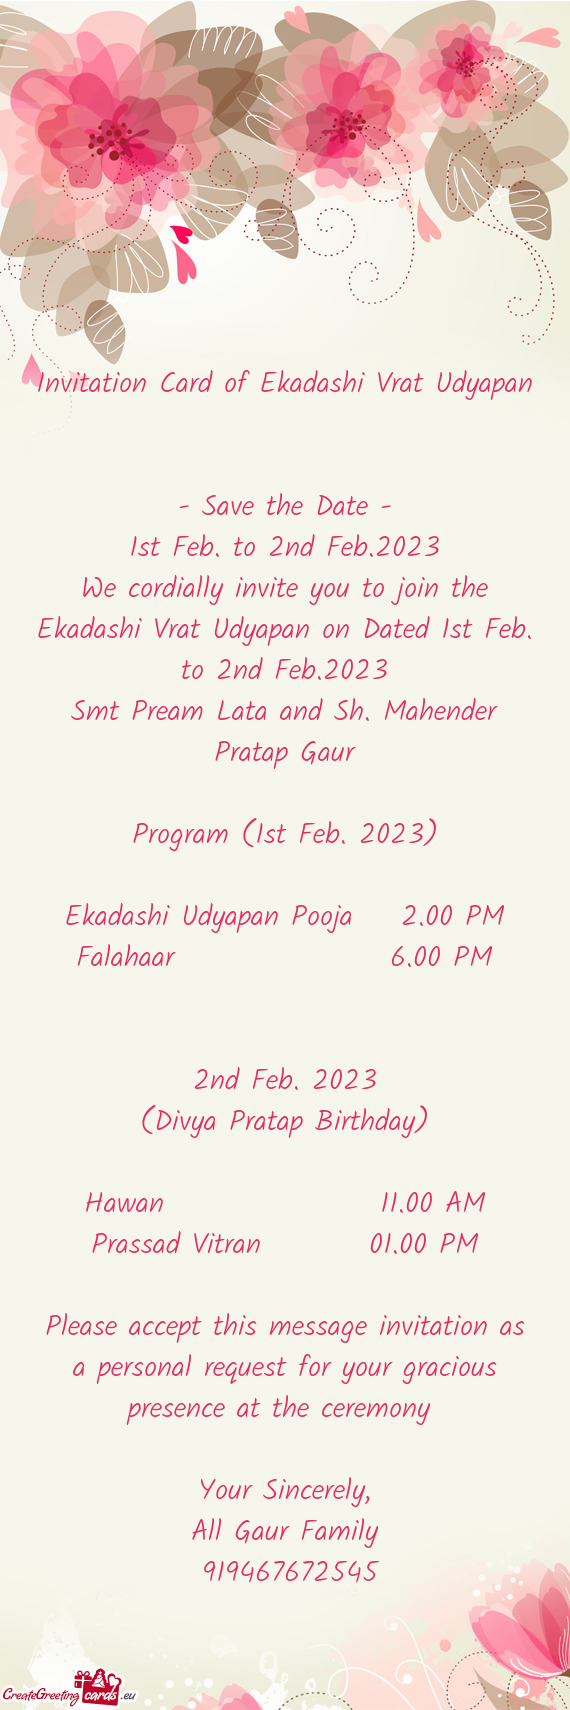 We cordially invite you to join the Ekadashi Vrat Udyapan on Dated 1st Feb. to 2nd Feb.2023